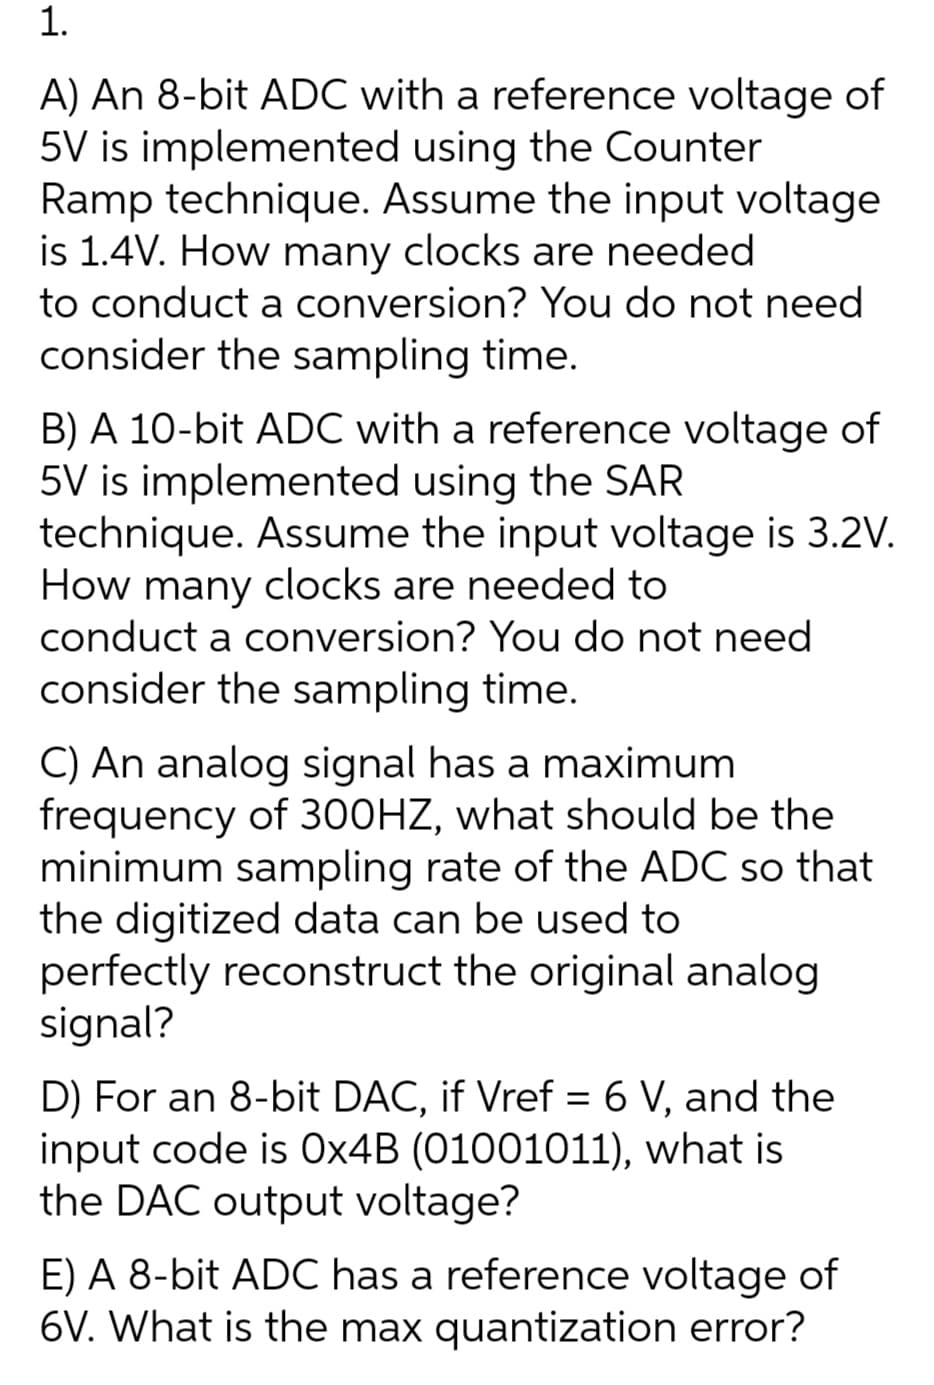 1.
A) An 8-bit ADC with a reference voltage of
5V is implemented using the Counter
Ramp technique. Assume the input voltage
is 1.4V. How many clocks are needed
to conduct a conversion? You do not need
consider the sampling time.
B) A 10-bit ADC with a reference voltage of
5V is implemented using the SAR
technique. Assume the input voltage is 3.2V.
How many clocks are needed to
conduct a conversion? You do not need
consider the sampling time.
C) An analog signal has a maximum
frequency of 300HZ, what should be the
minimum sampling rate of the ADC so that
the digitized data can be used to
perfectly reconstruct the original analog
signal?
D) For an 8-bit DAC, if Vref = 6 V, and the
input code is 0×4B (01001011), what is
the DAC output voltage?
E) A 8-bit ADC has a reference voltage of
6V. What is the max quantization error?
